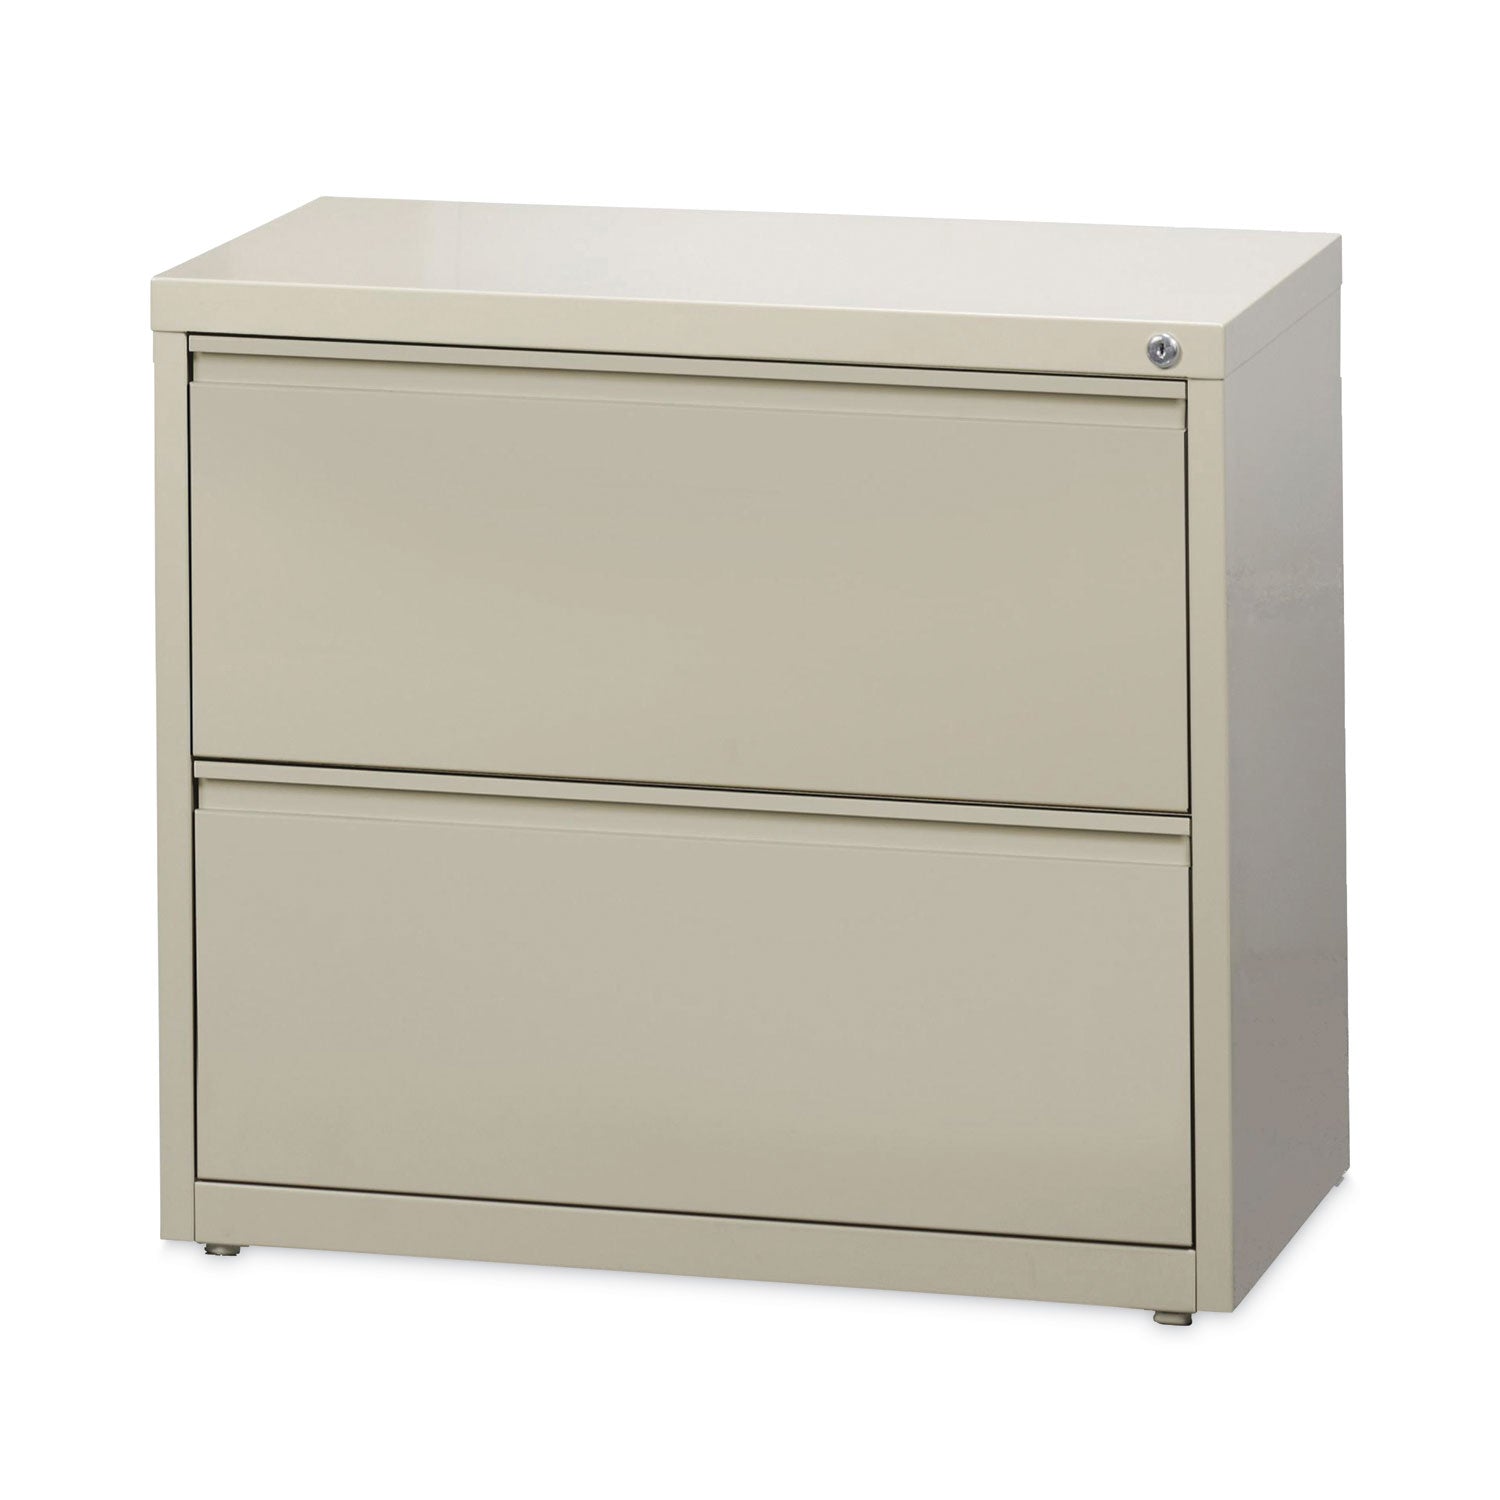 lateral-file-cabinet-2-letter-legal-a4-size-file-drawers-putty-30-x-1862-x-28_hid14970 - 4